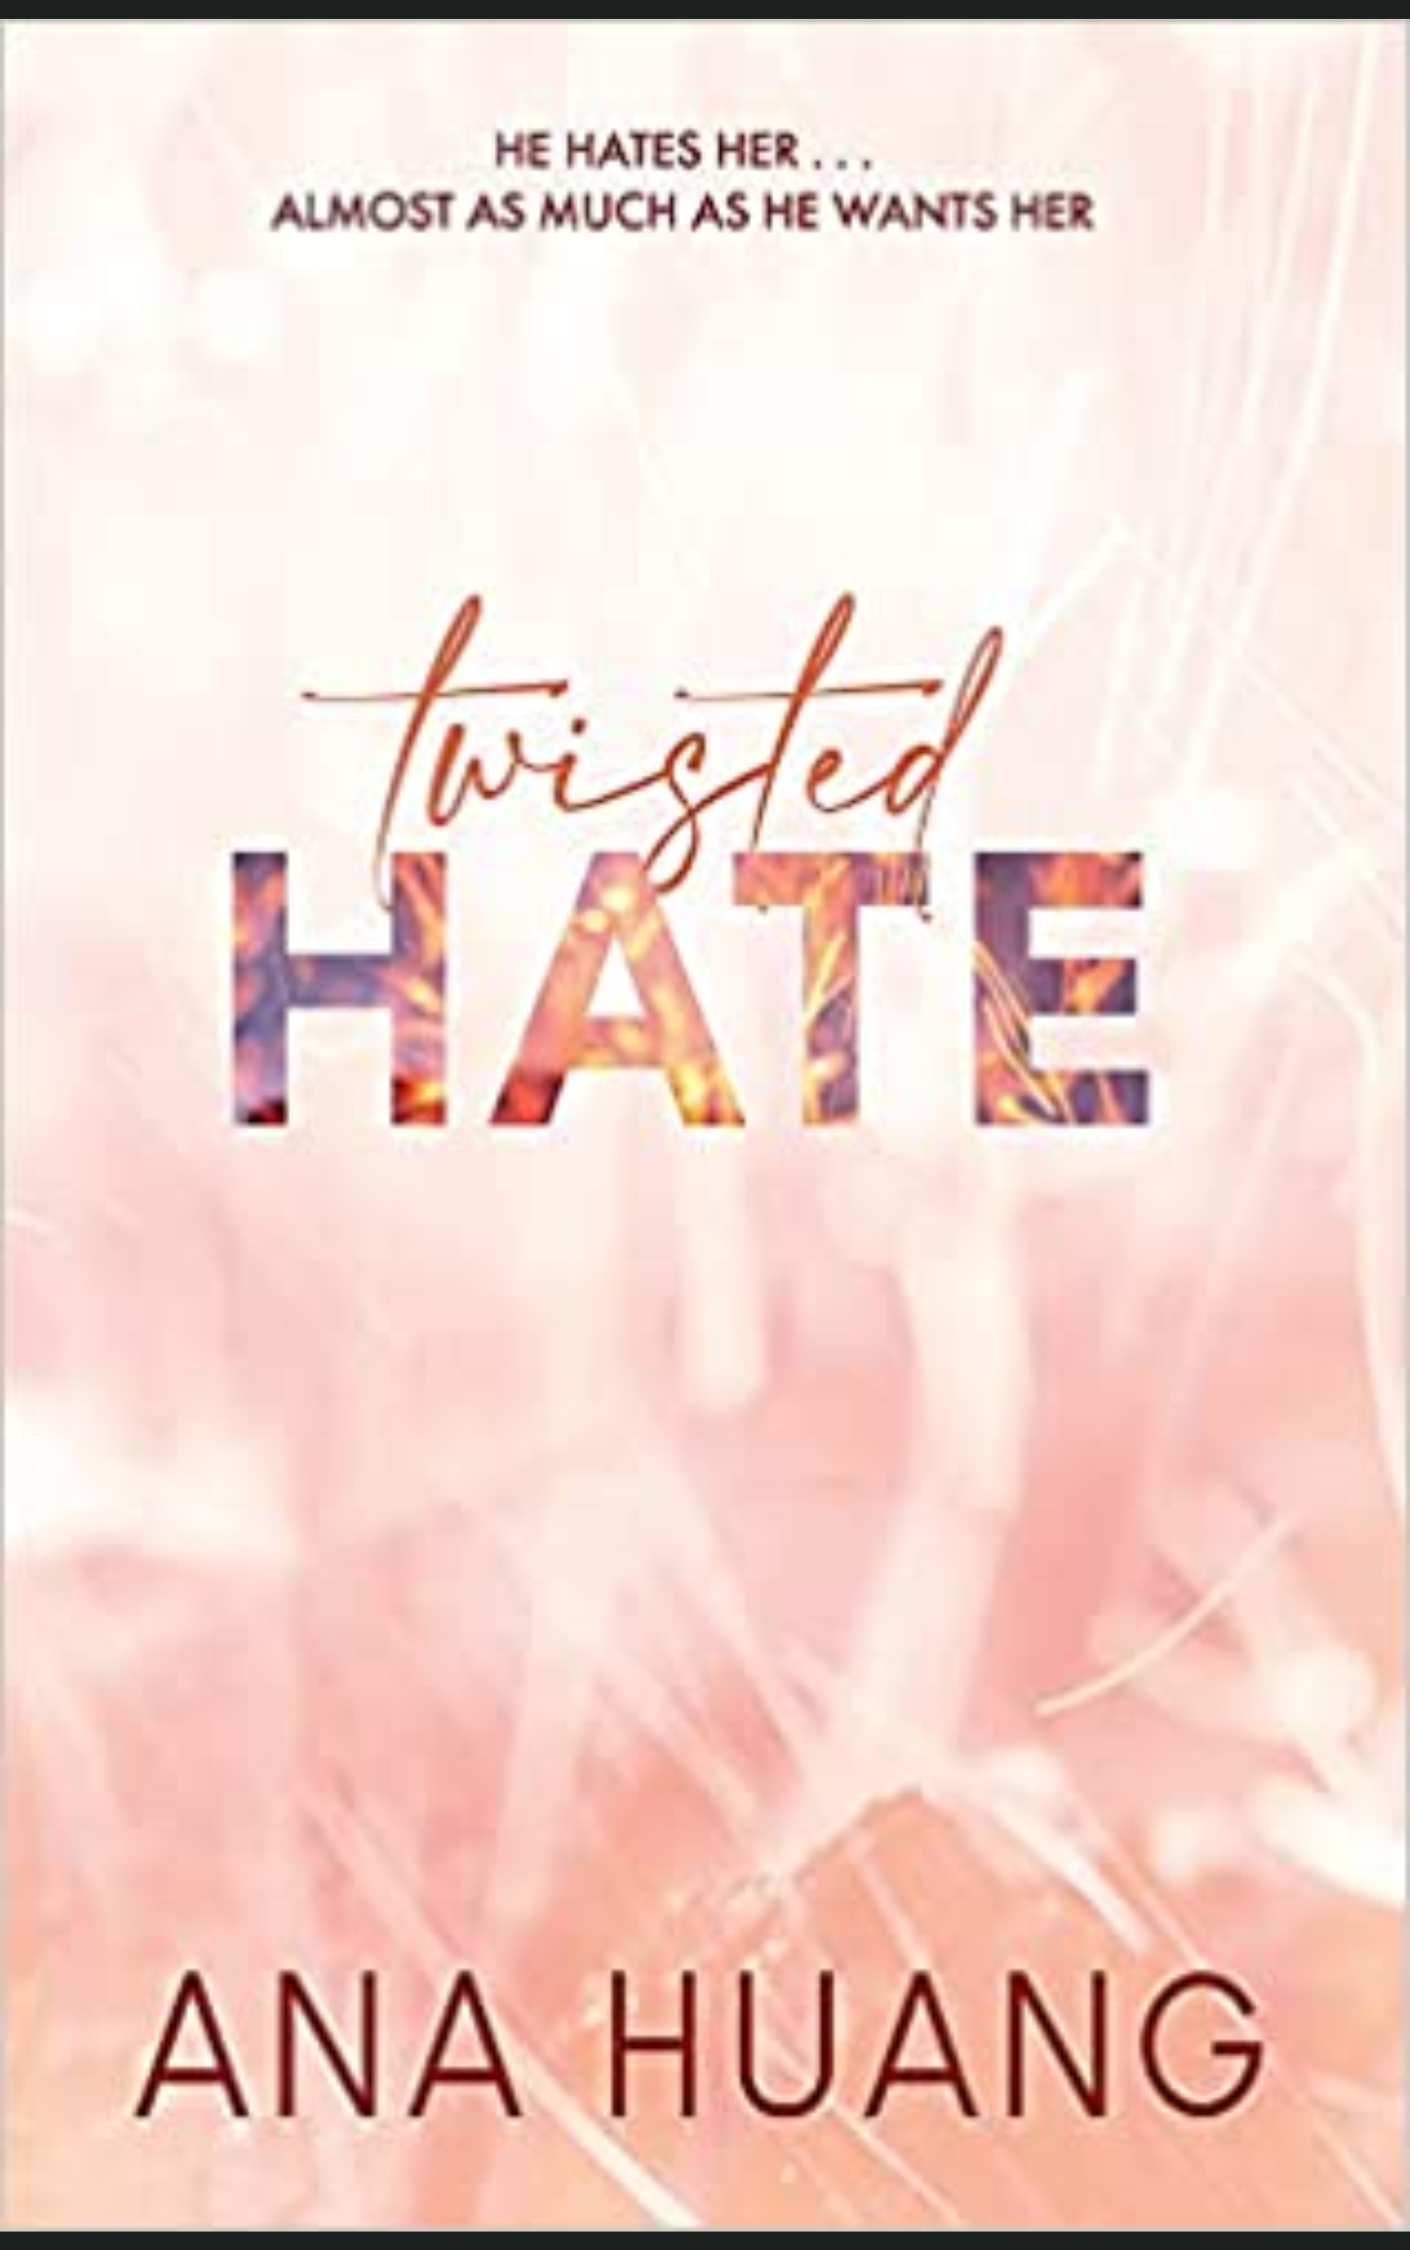 TWISTED HATE by ANA HUANG